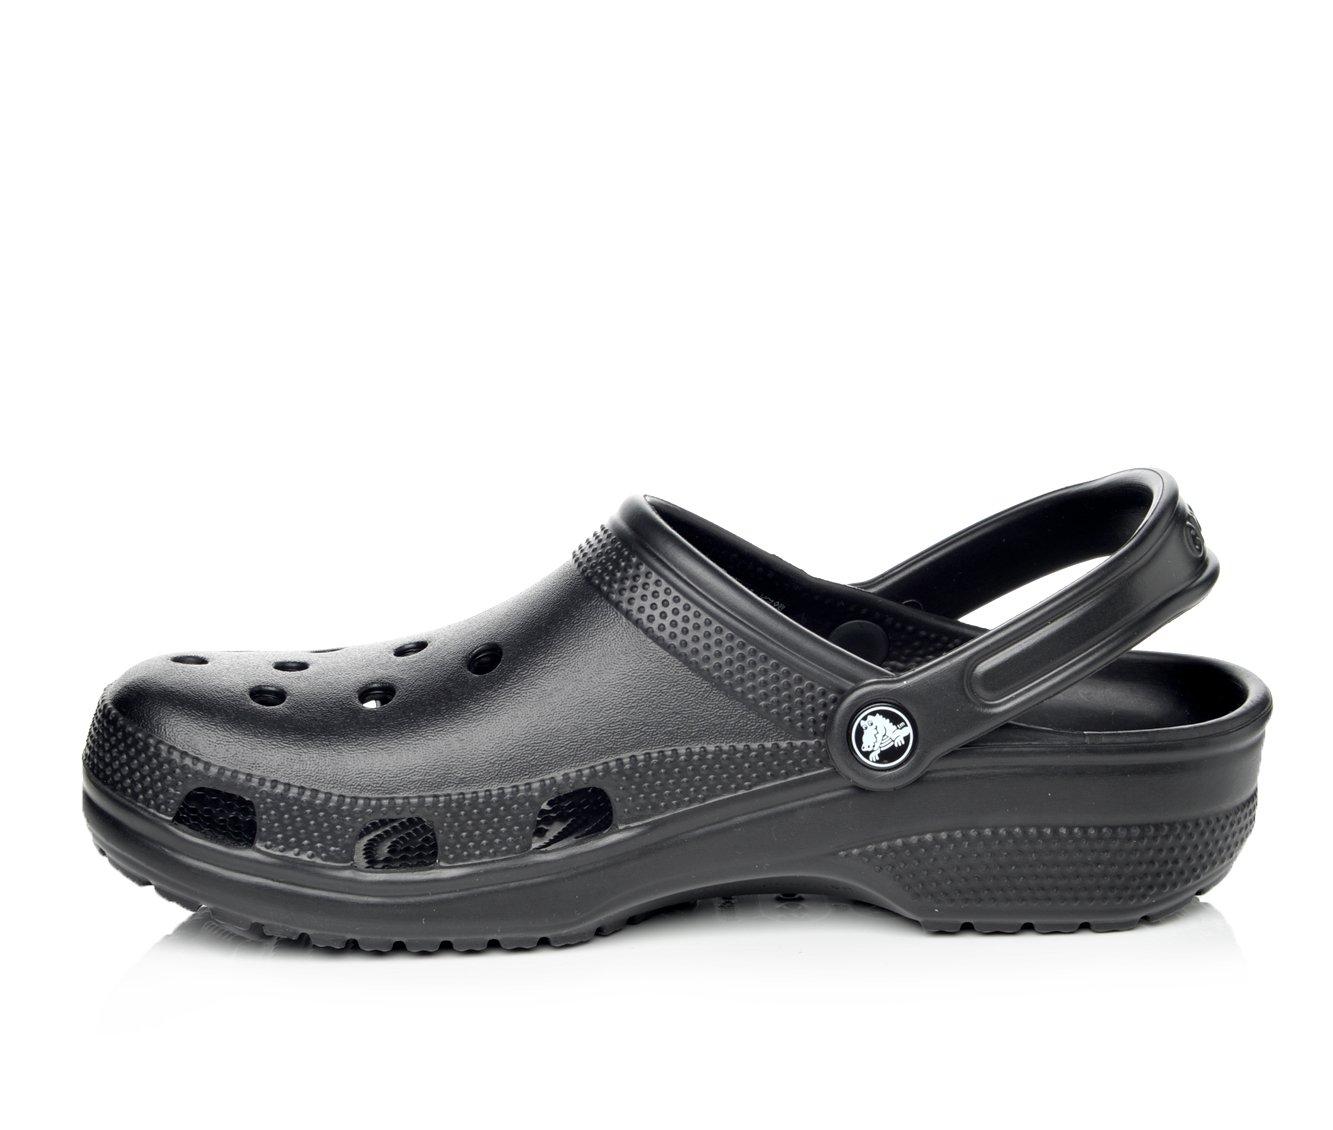 Crocs Clogs For Men Stylish And Funky Foot Wear By Campus Classic Clog Shoes